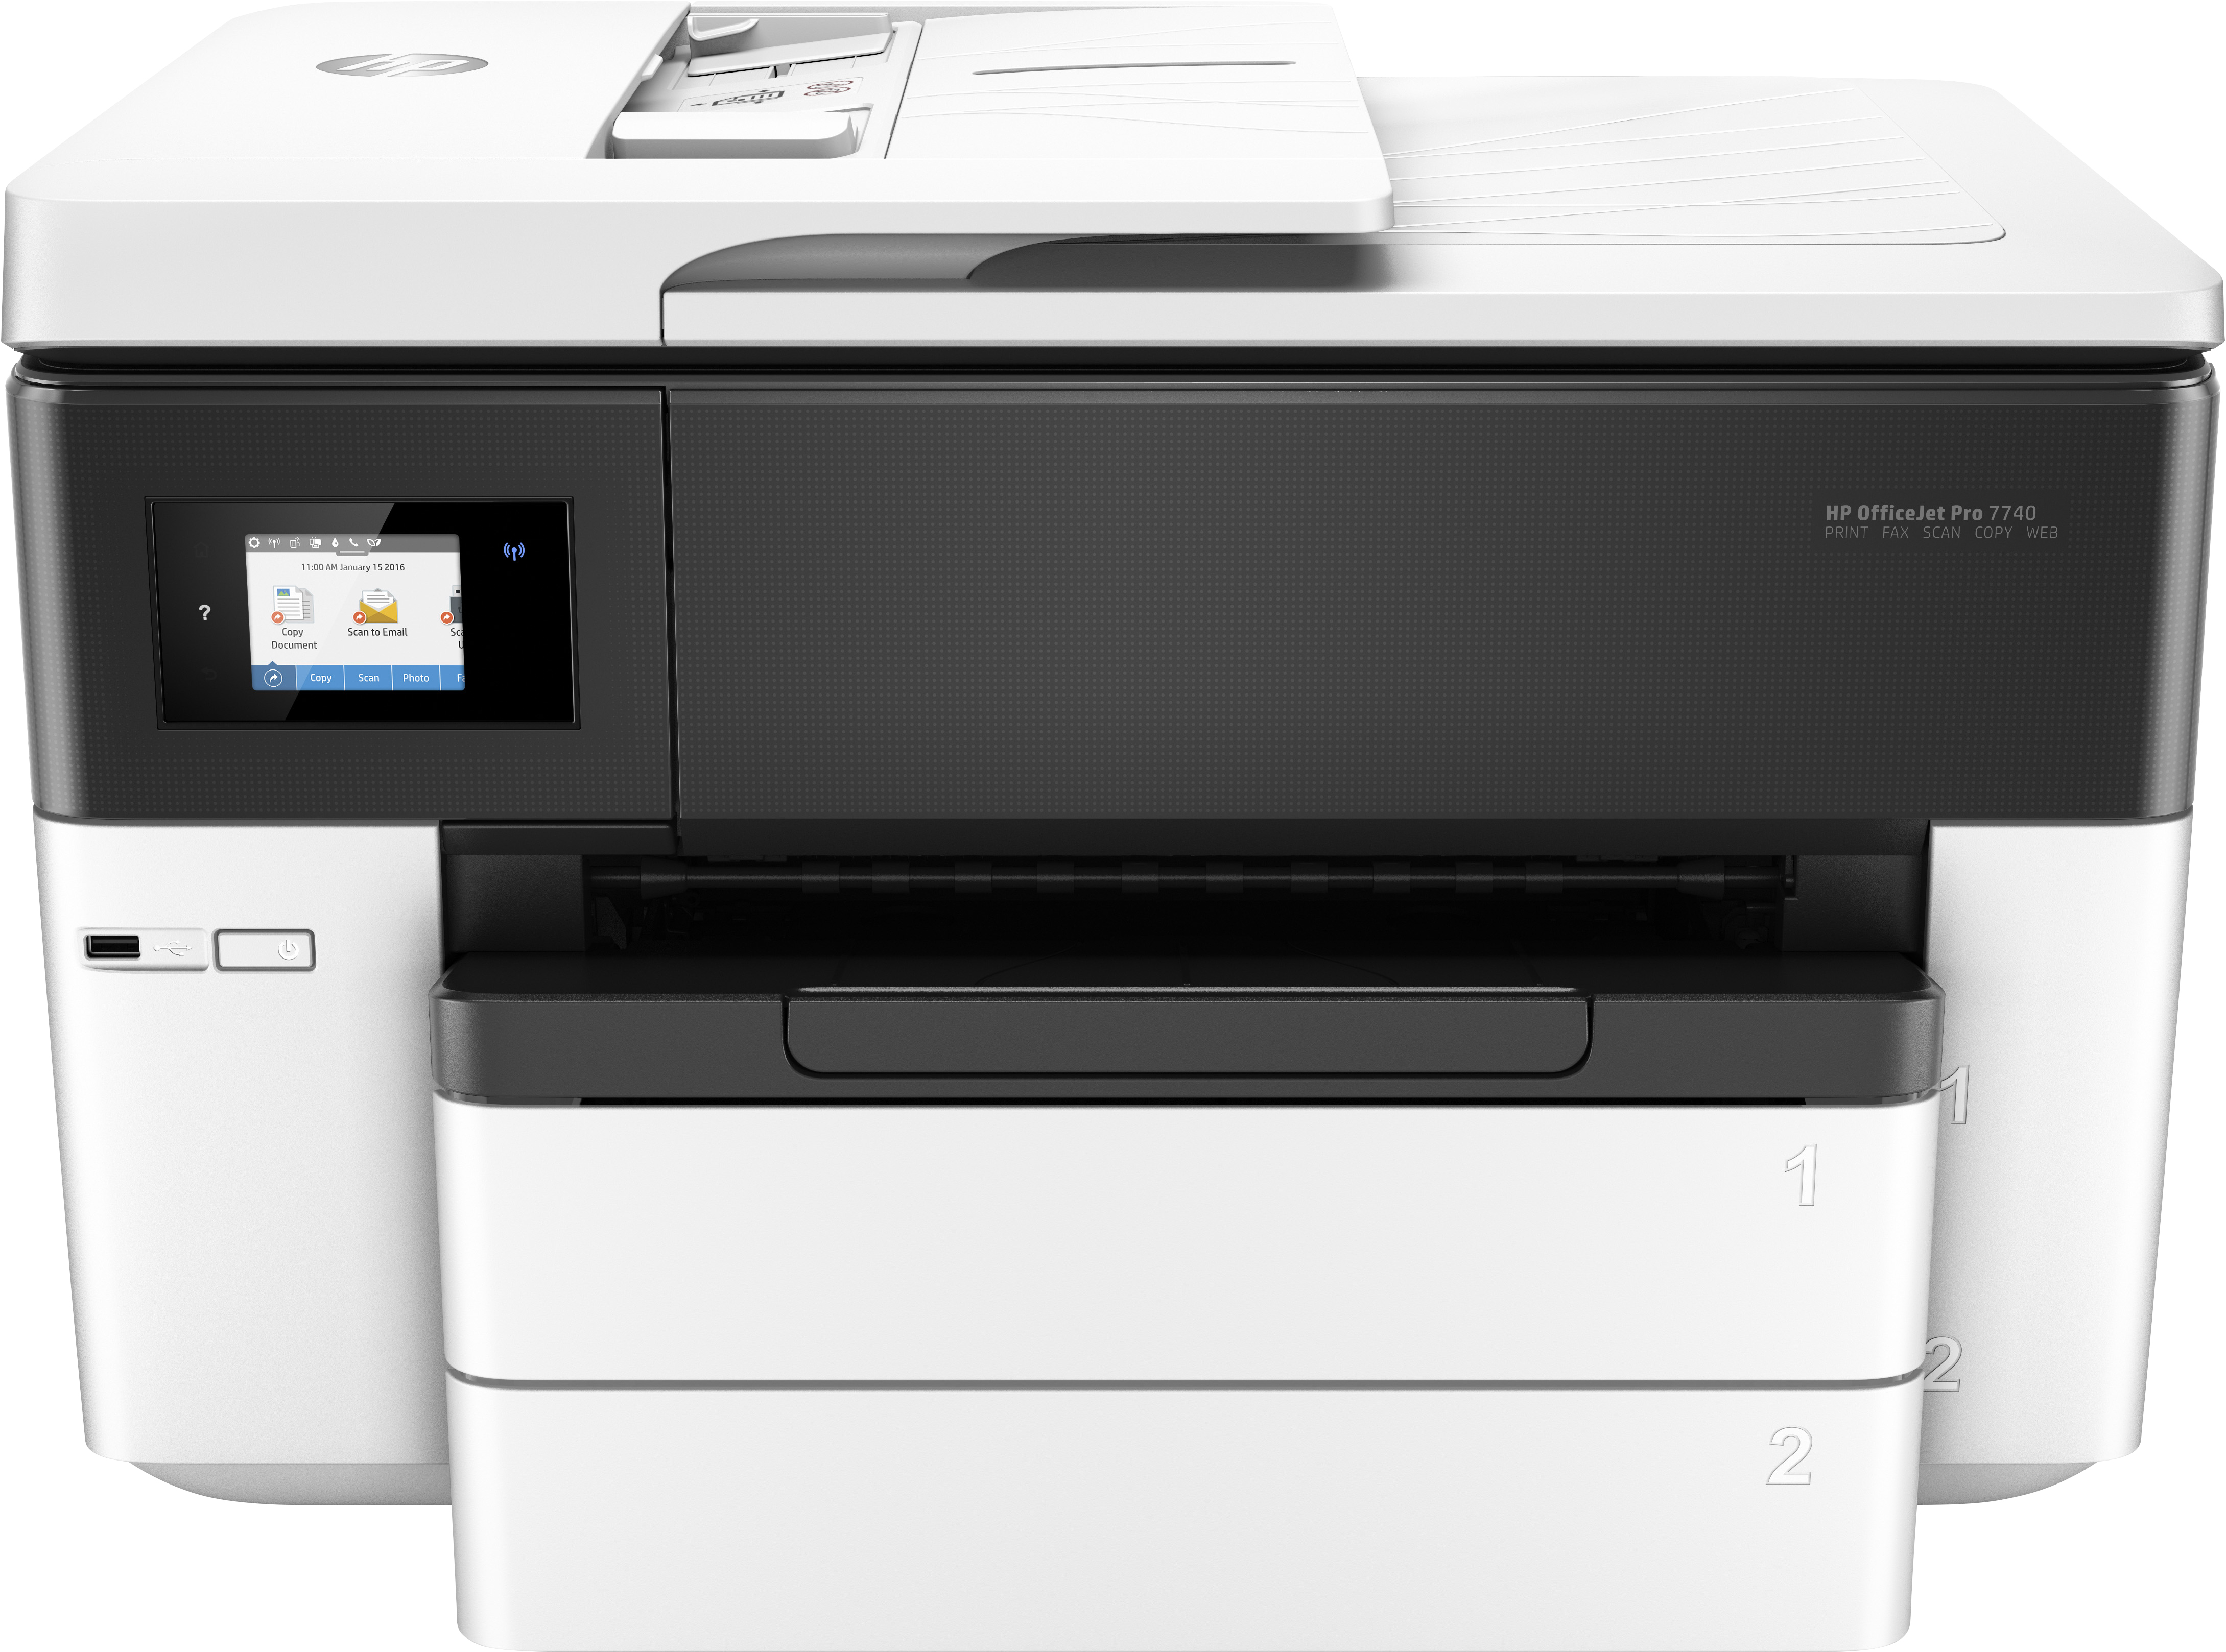 HP Pro 7740 Format All-in-One printer (G5J38A#A80)